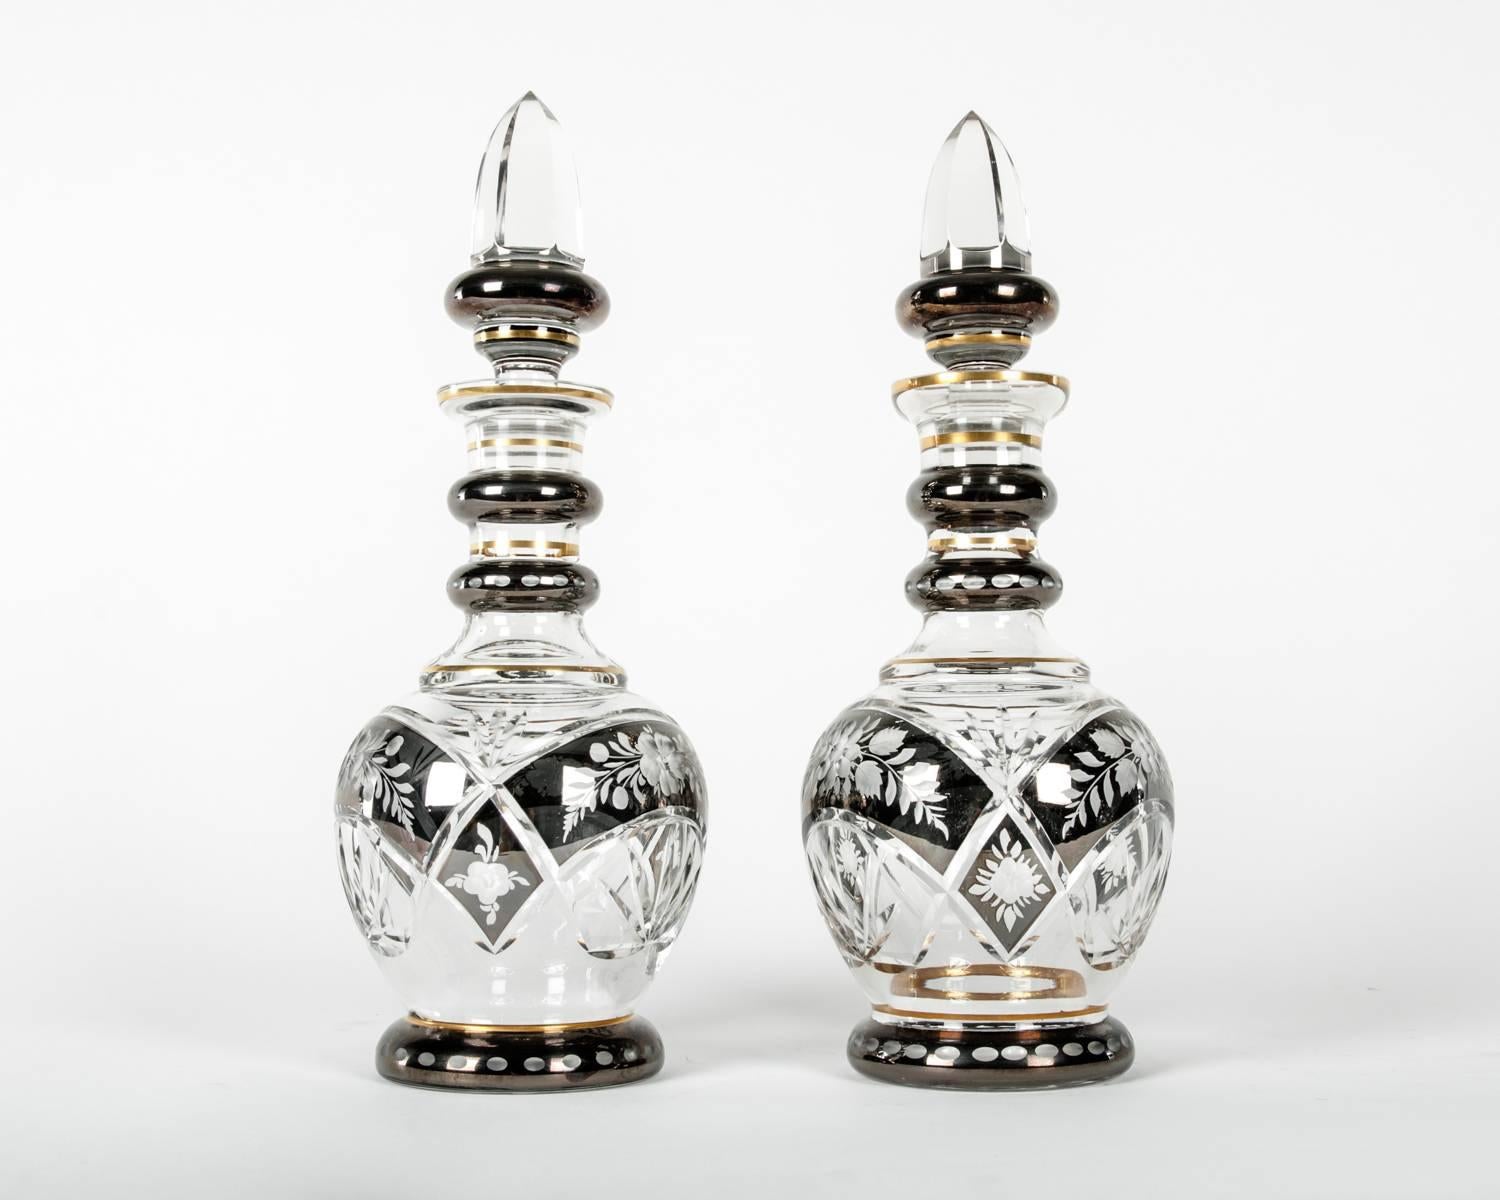 Mid-20th century pair of cut crystal with etched design details and arched band cut and gold trim barware / tableware decanter service. Each decanter is in great vintage condition minor wear consistent with age / use. Each one stands about 13.5